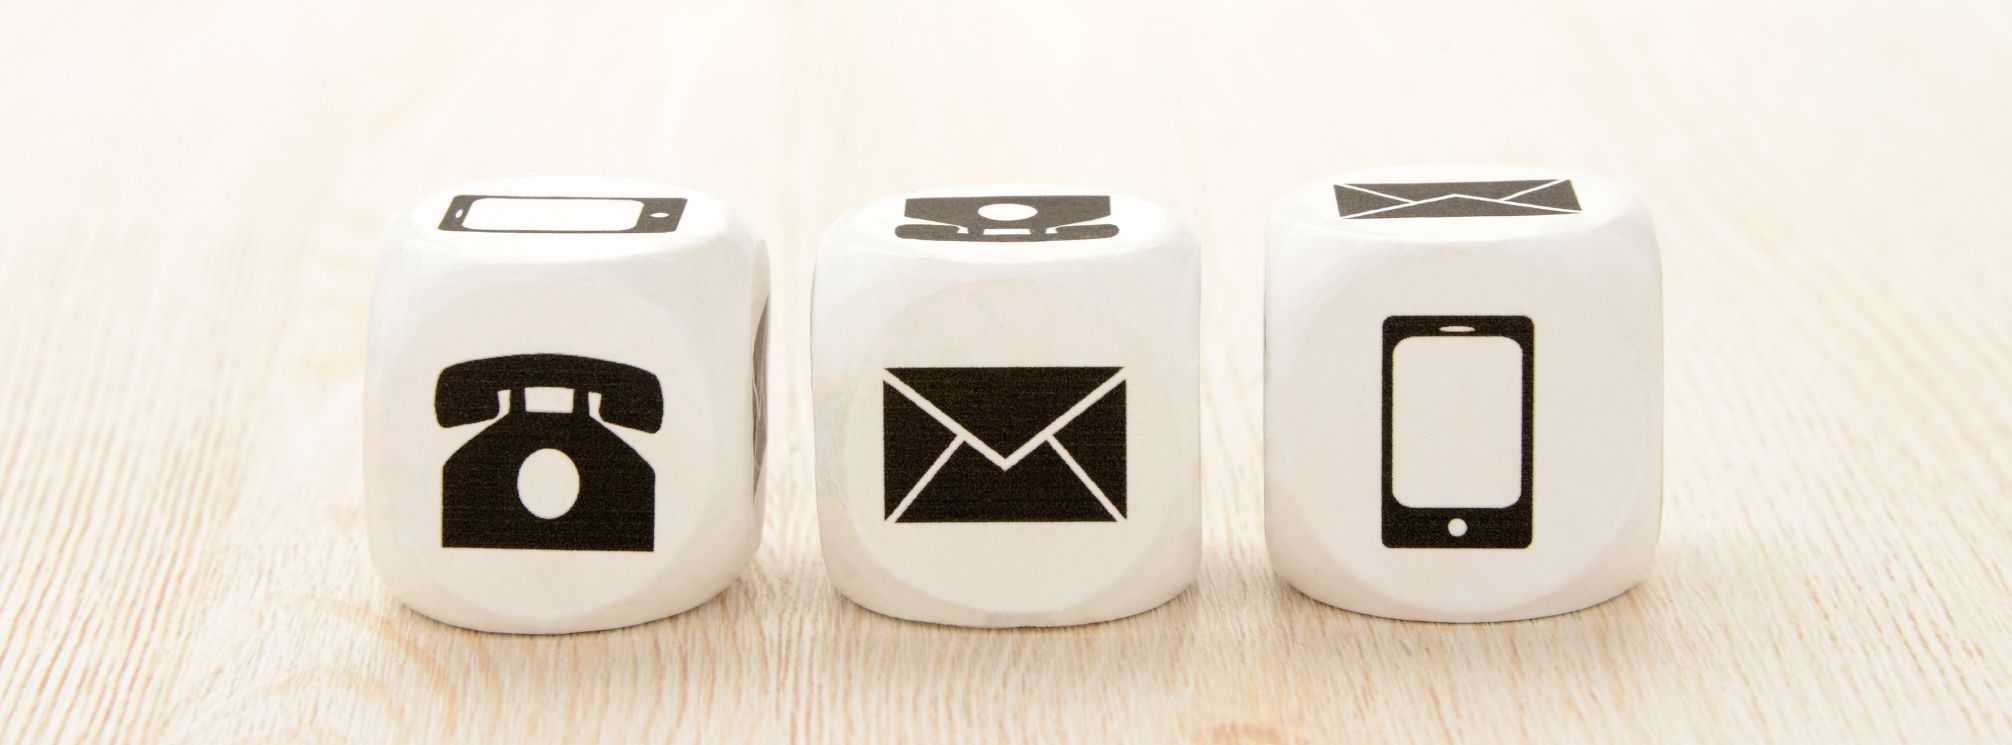 three wooden blocks with icons for telephone, email, and mobile employee apps, which are all types of employee communication tools